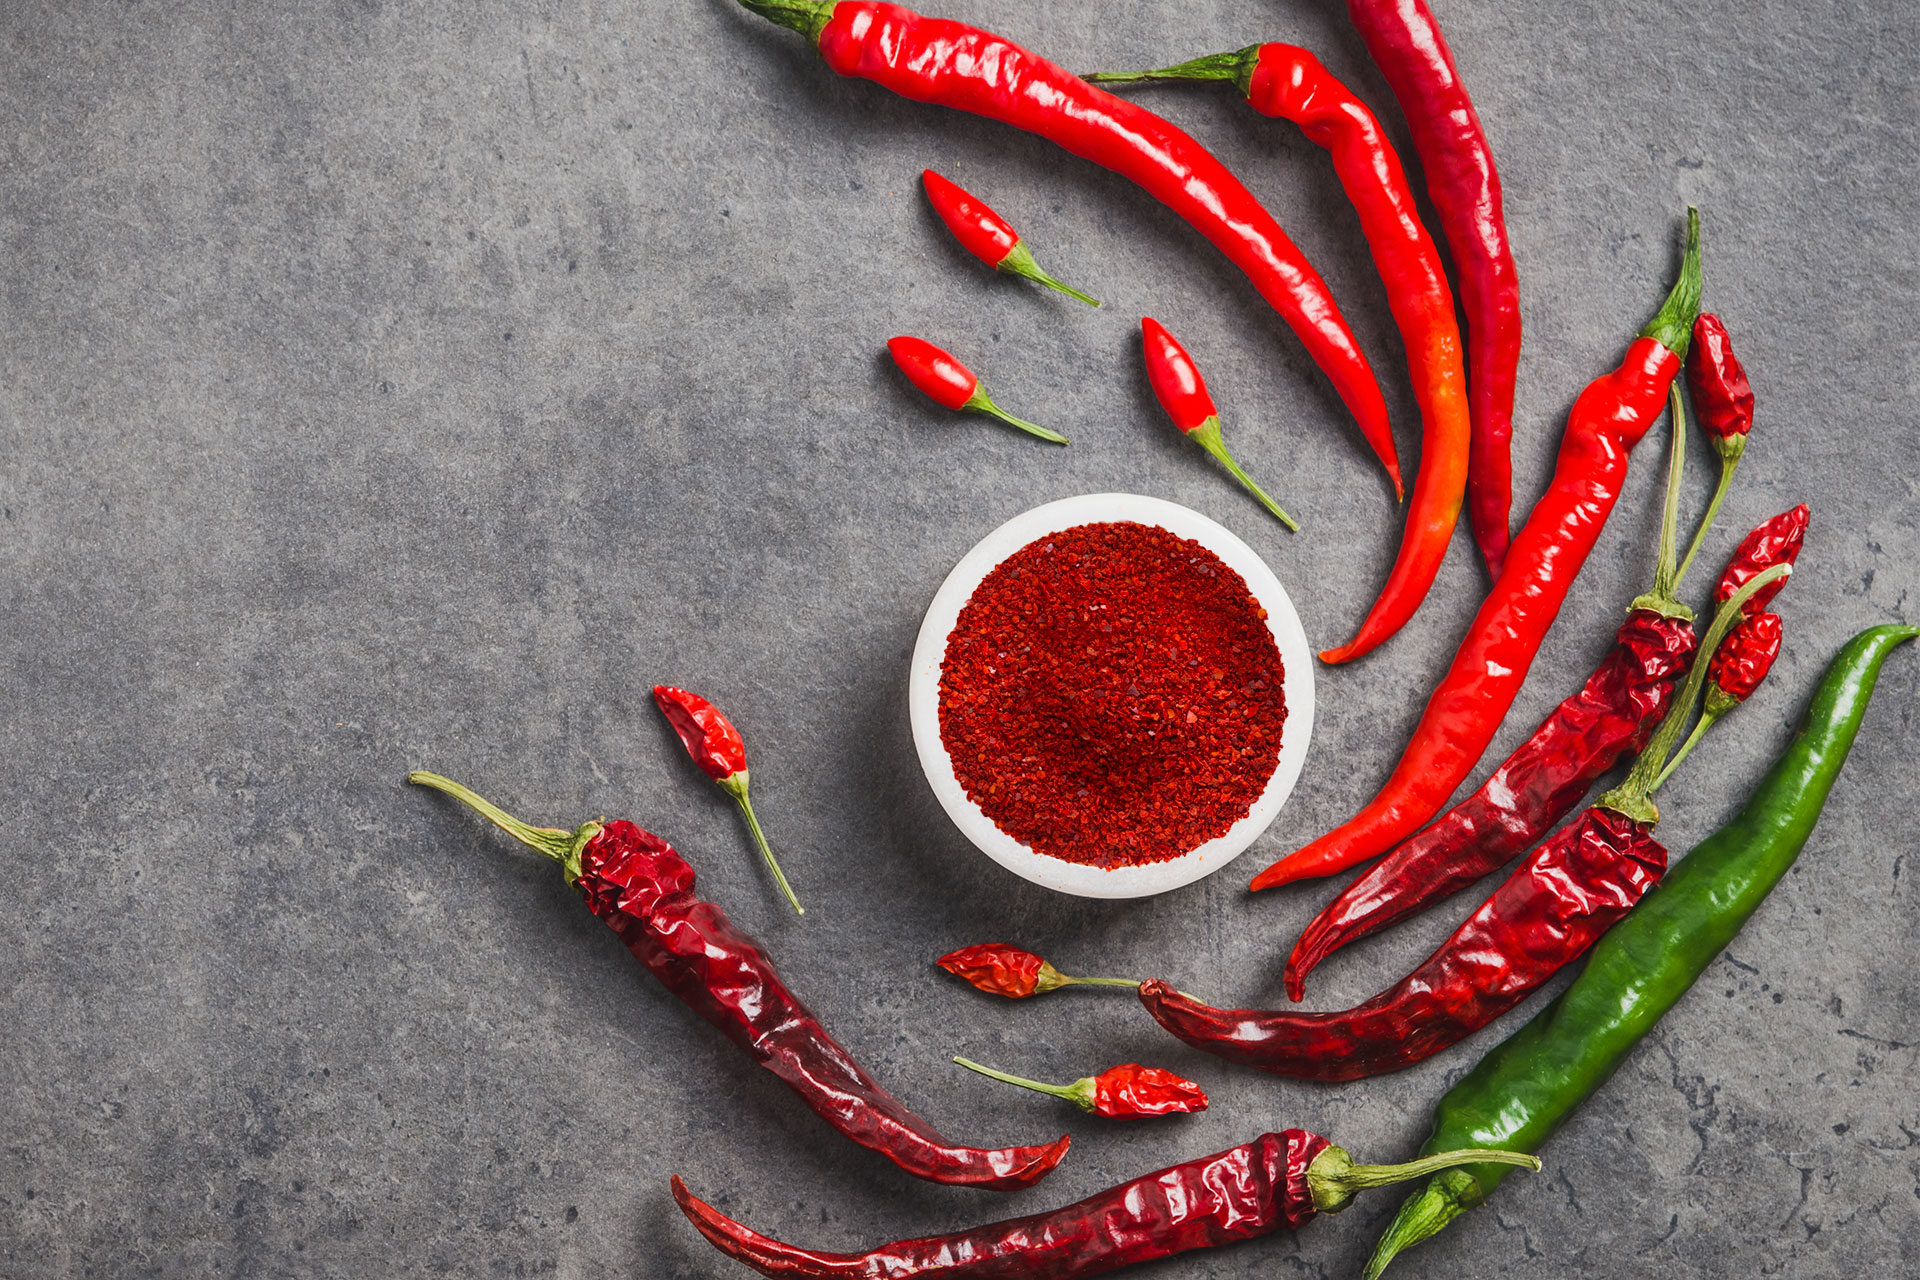 Fresh Chilli & Dried Chilli: What's the Difference? | Asian